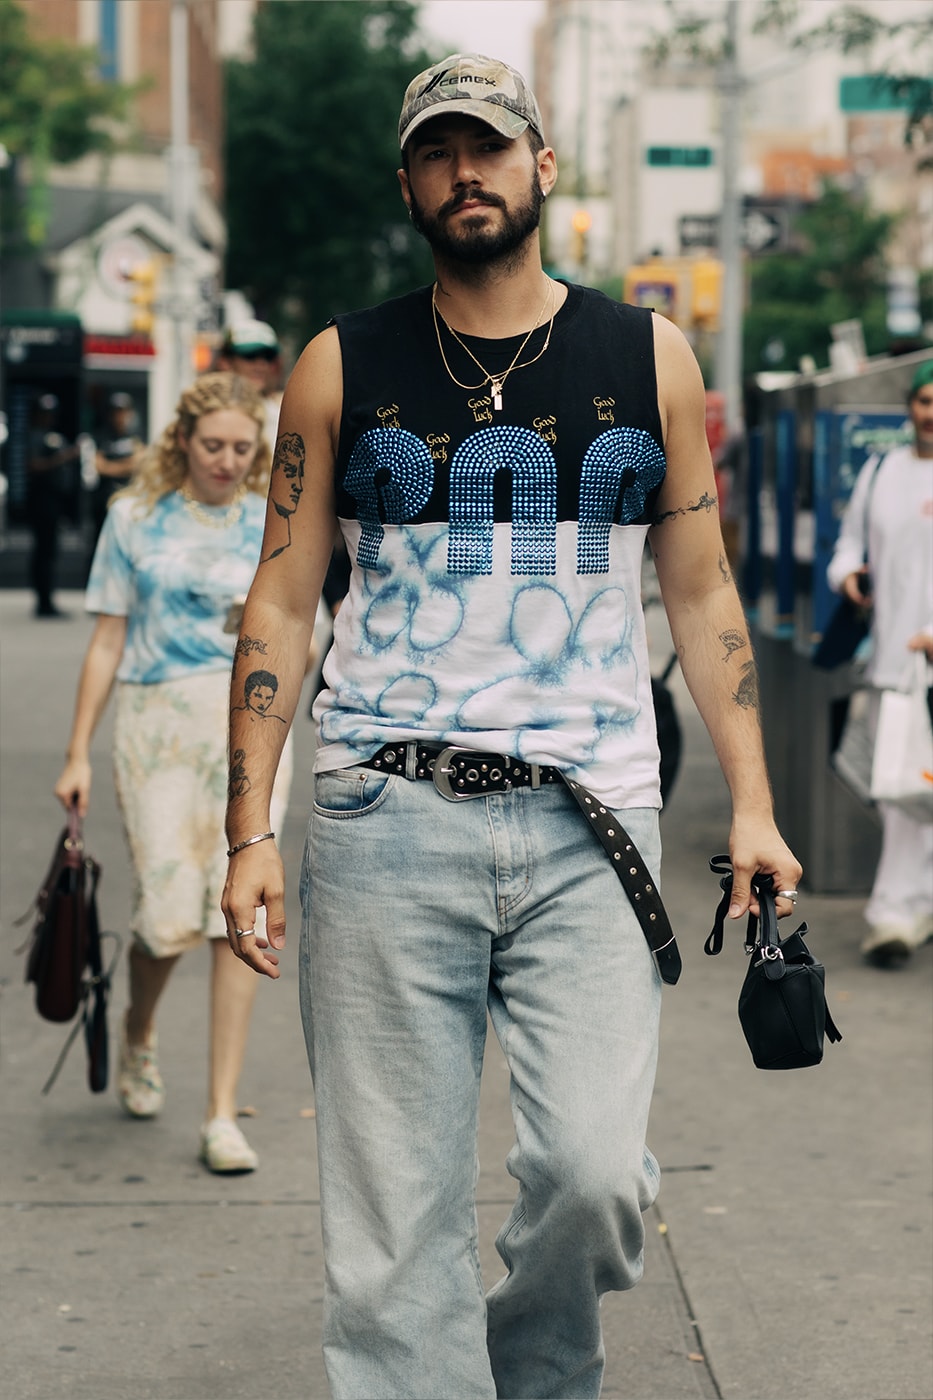 Streetwear Rules at Men's Fashion Week in New York – The Hollywood Reporter